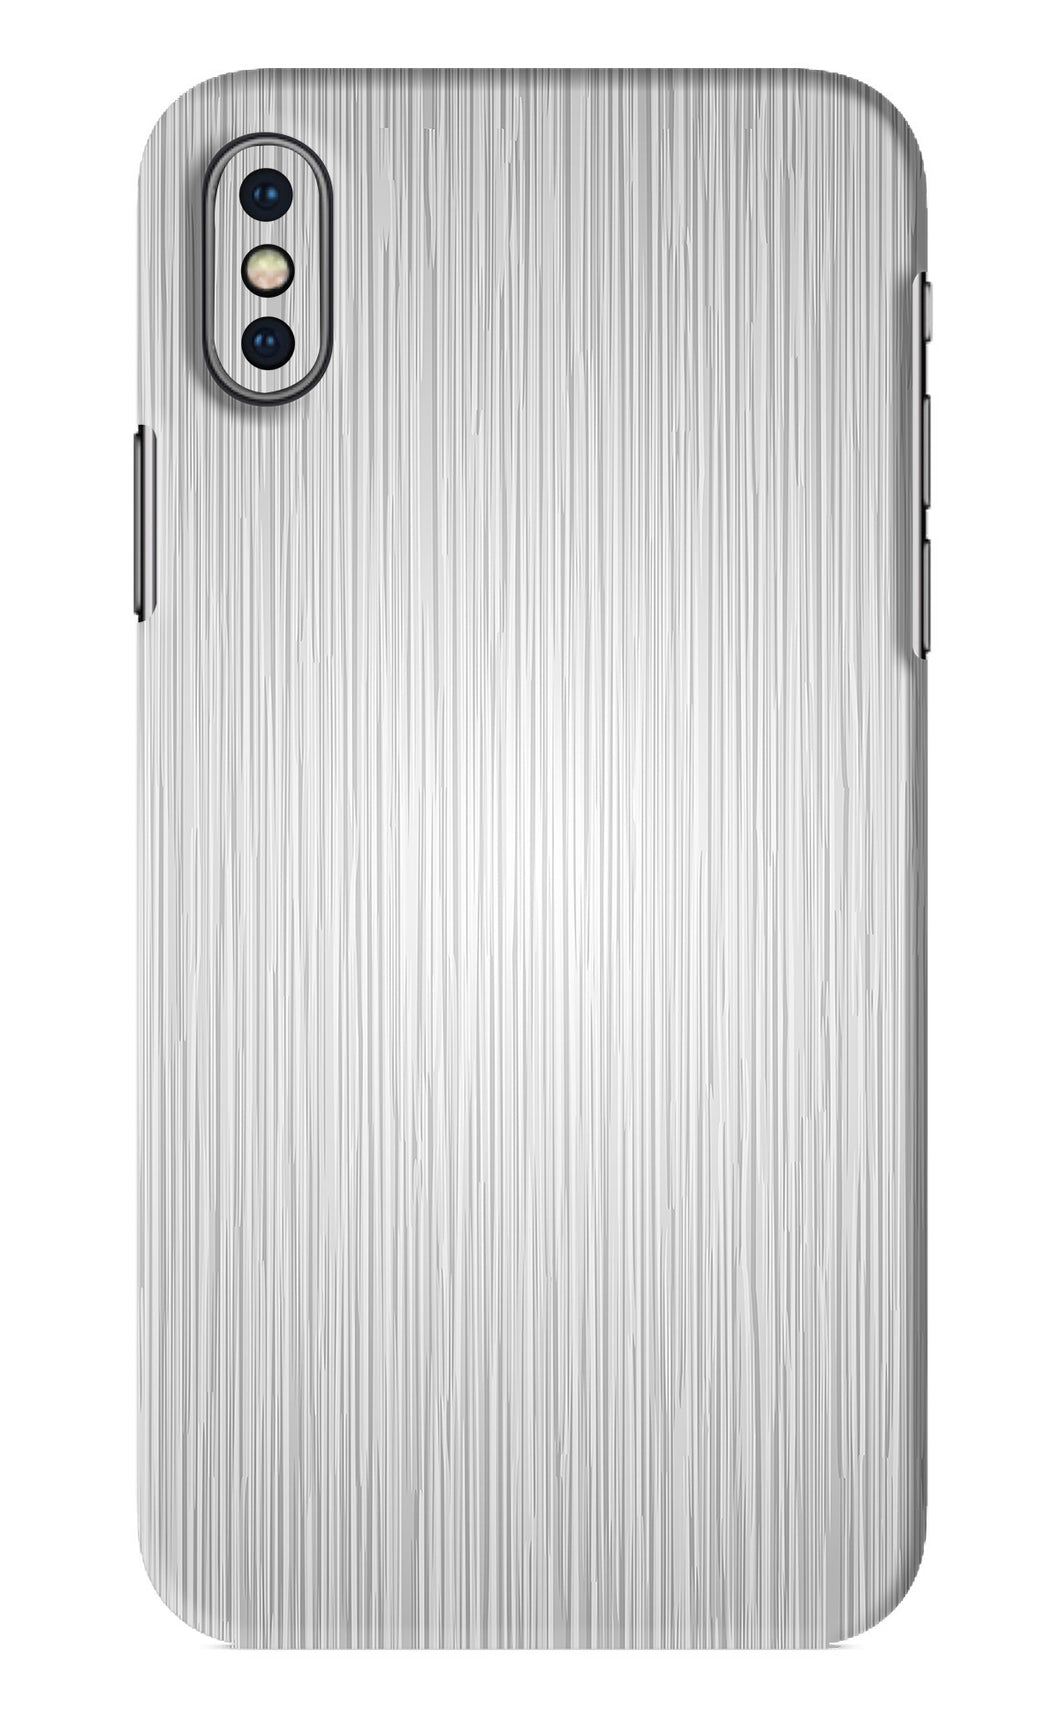 Wooden Grey Texture iPhone XS Back Skin Wrap